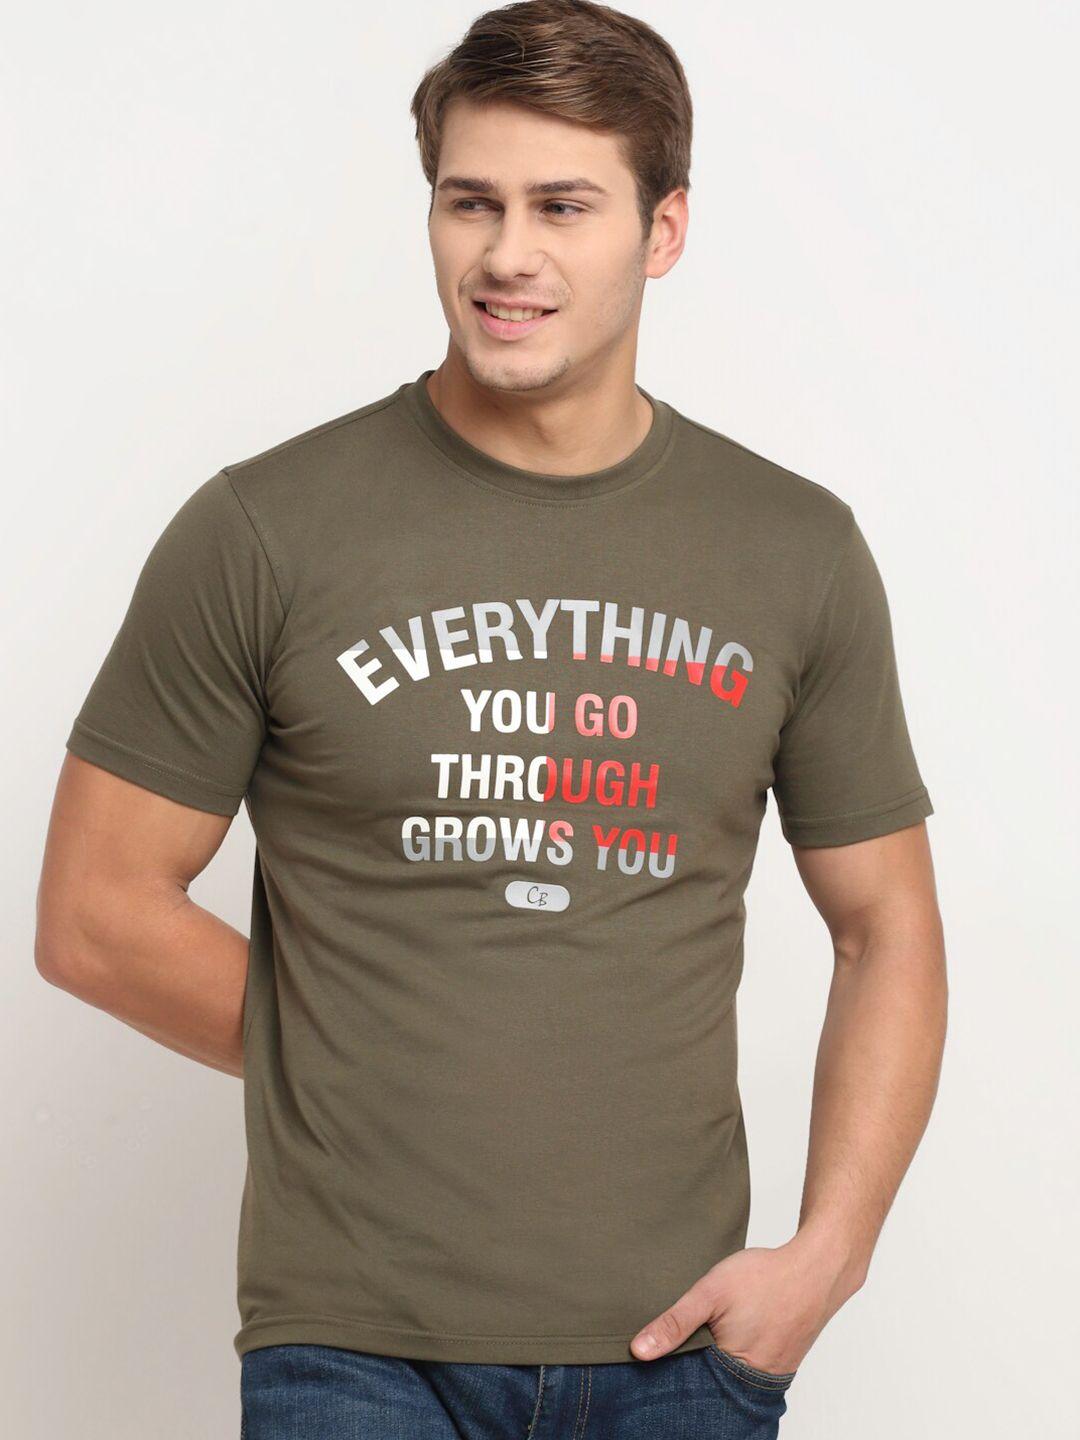 cantabil men olive green cotton typography printed t-shirt